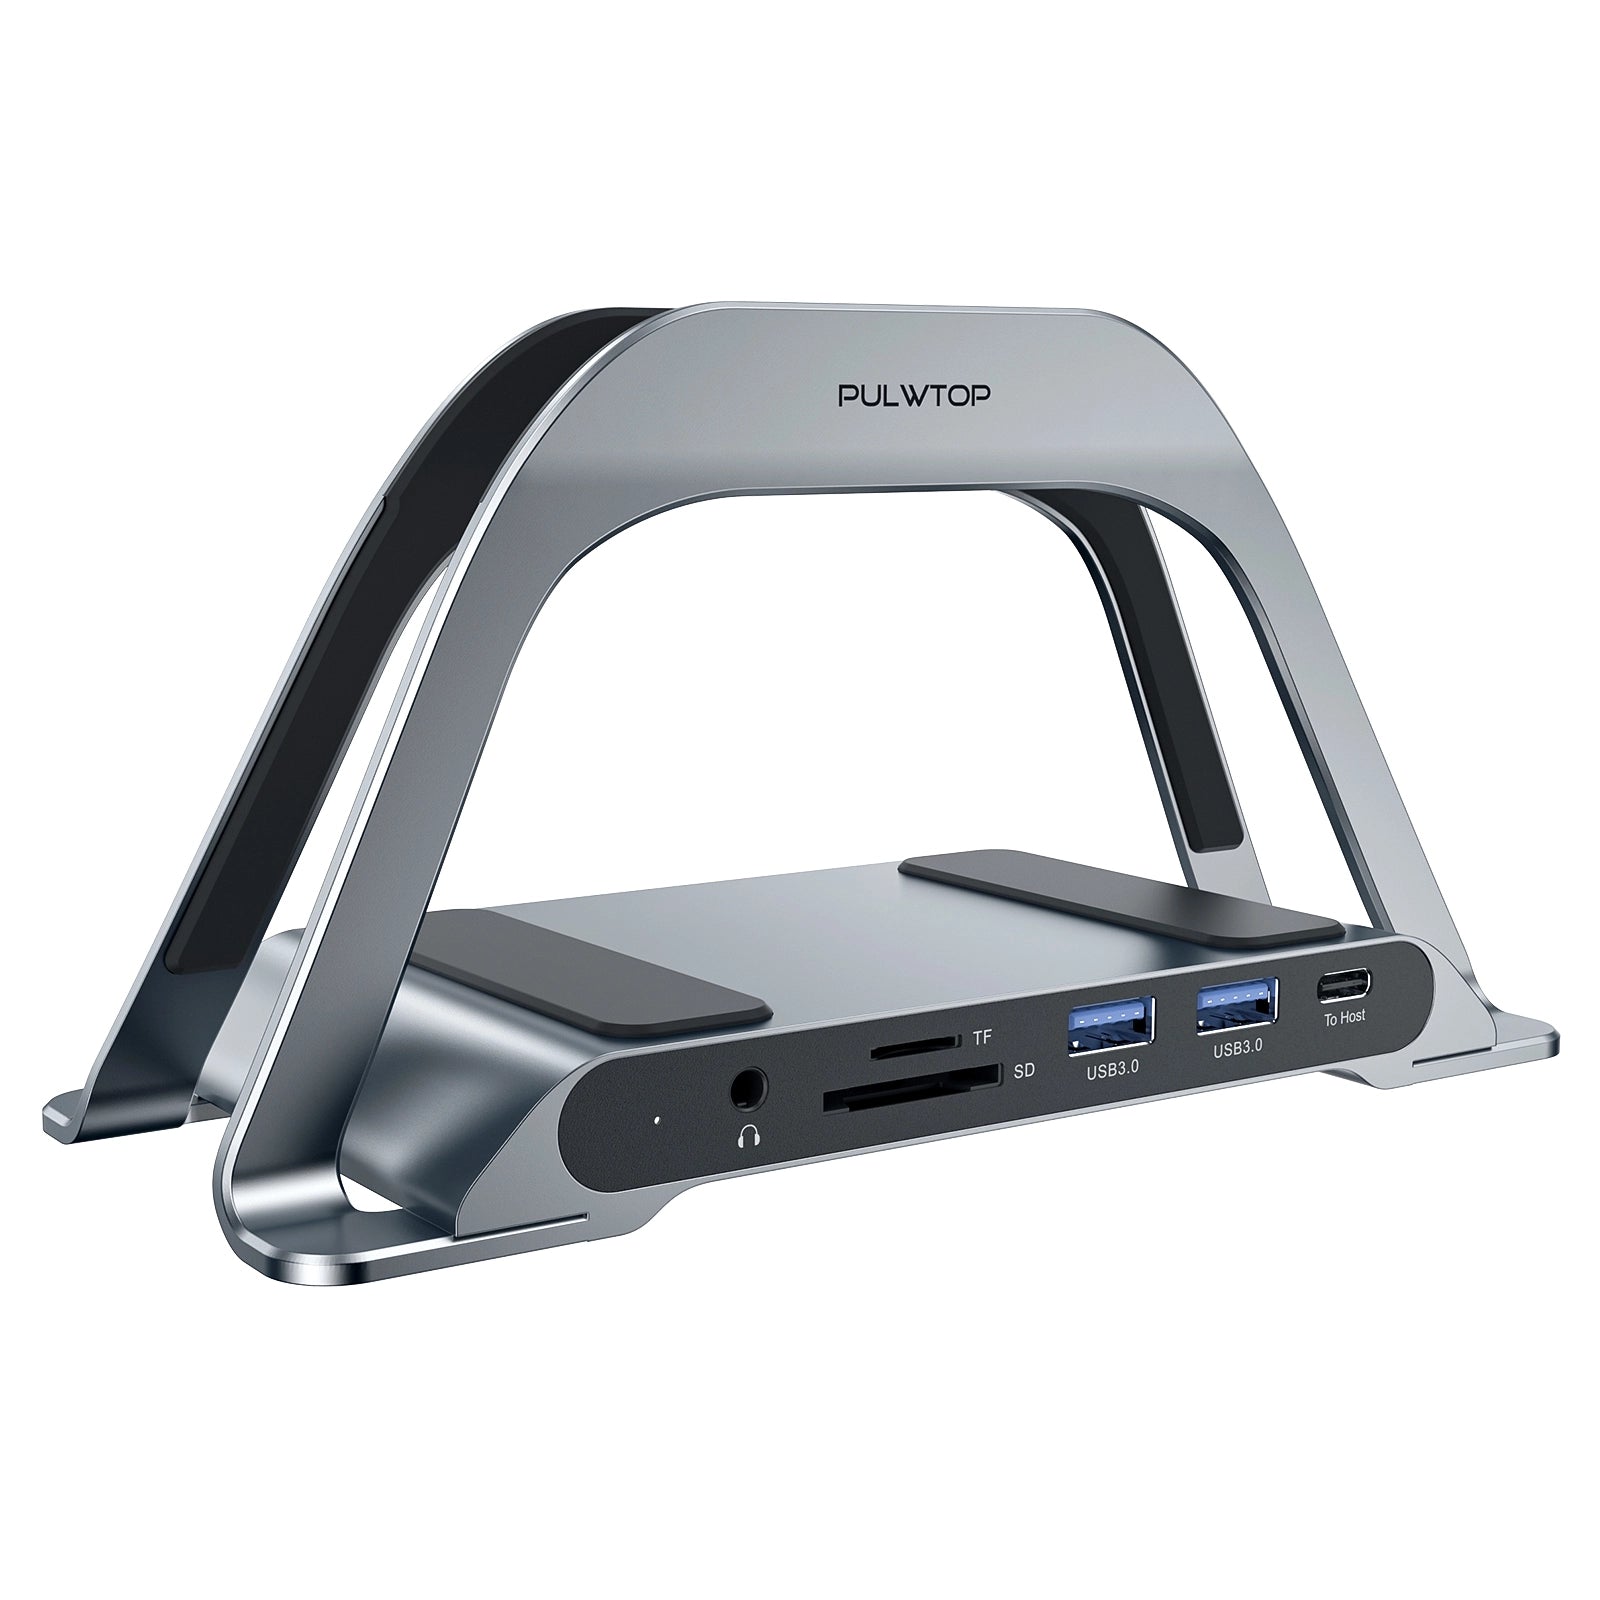 PULWTOP MacBook Dock, USB C docking station with vertical stand, compatible with MacBook Pro and Air, for HP/Dell/Lenovo laptops